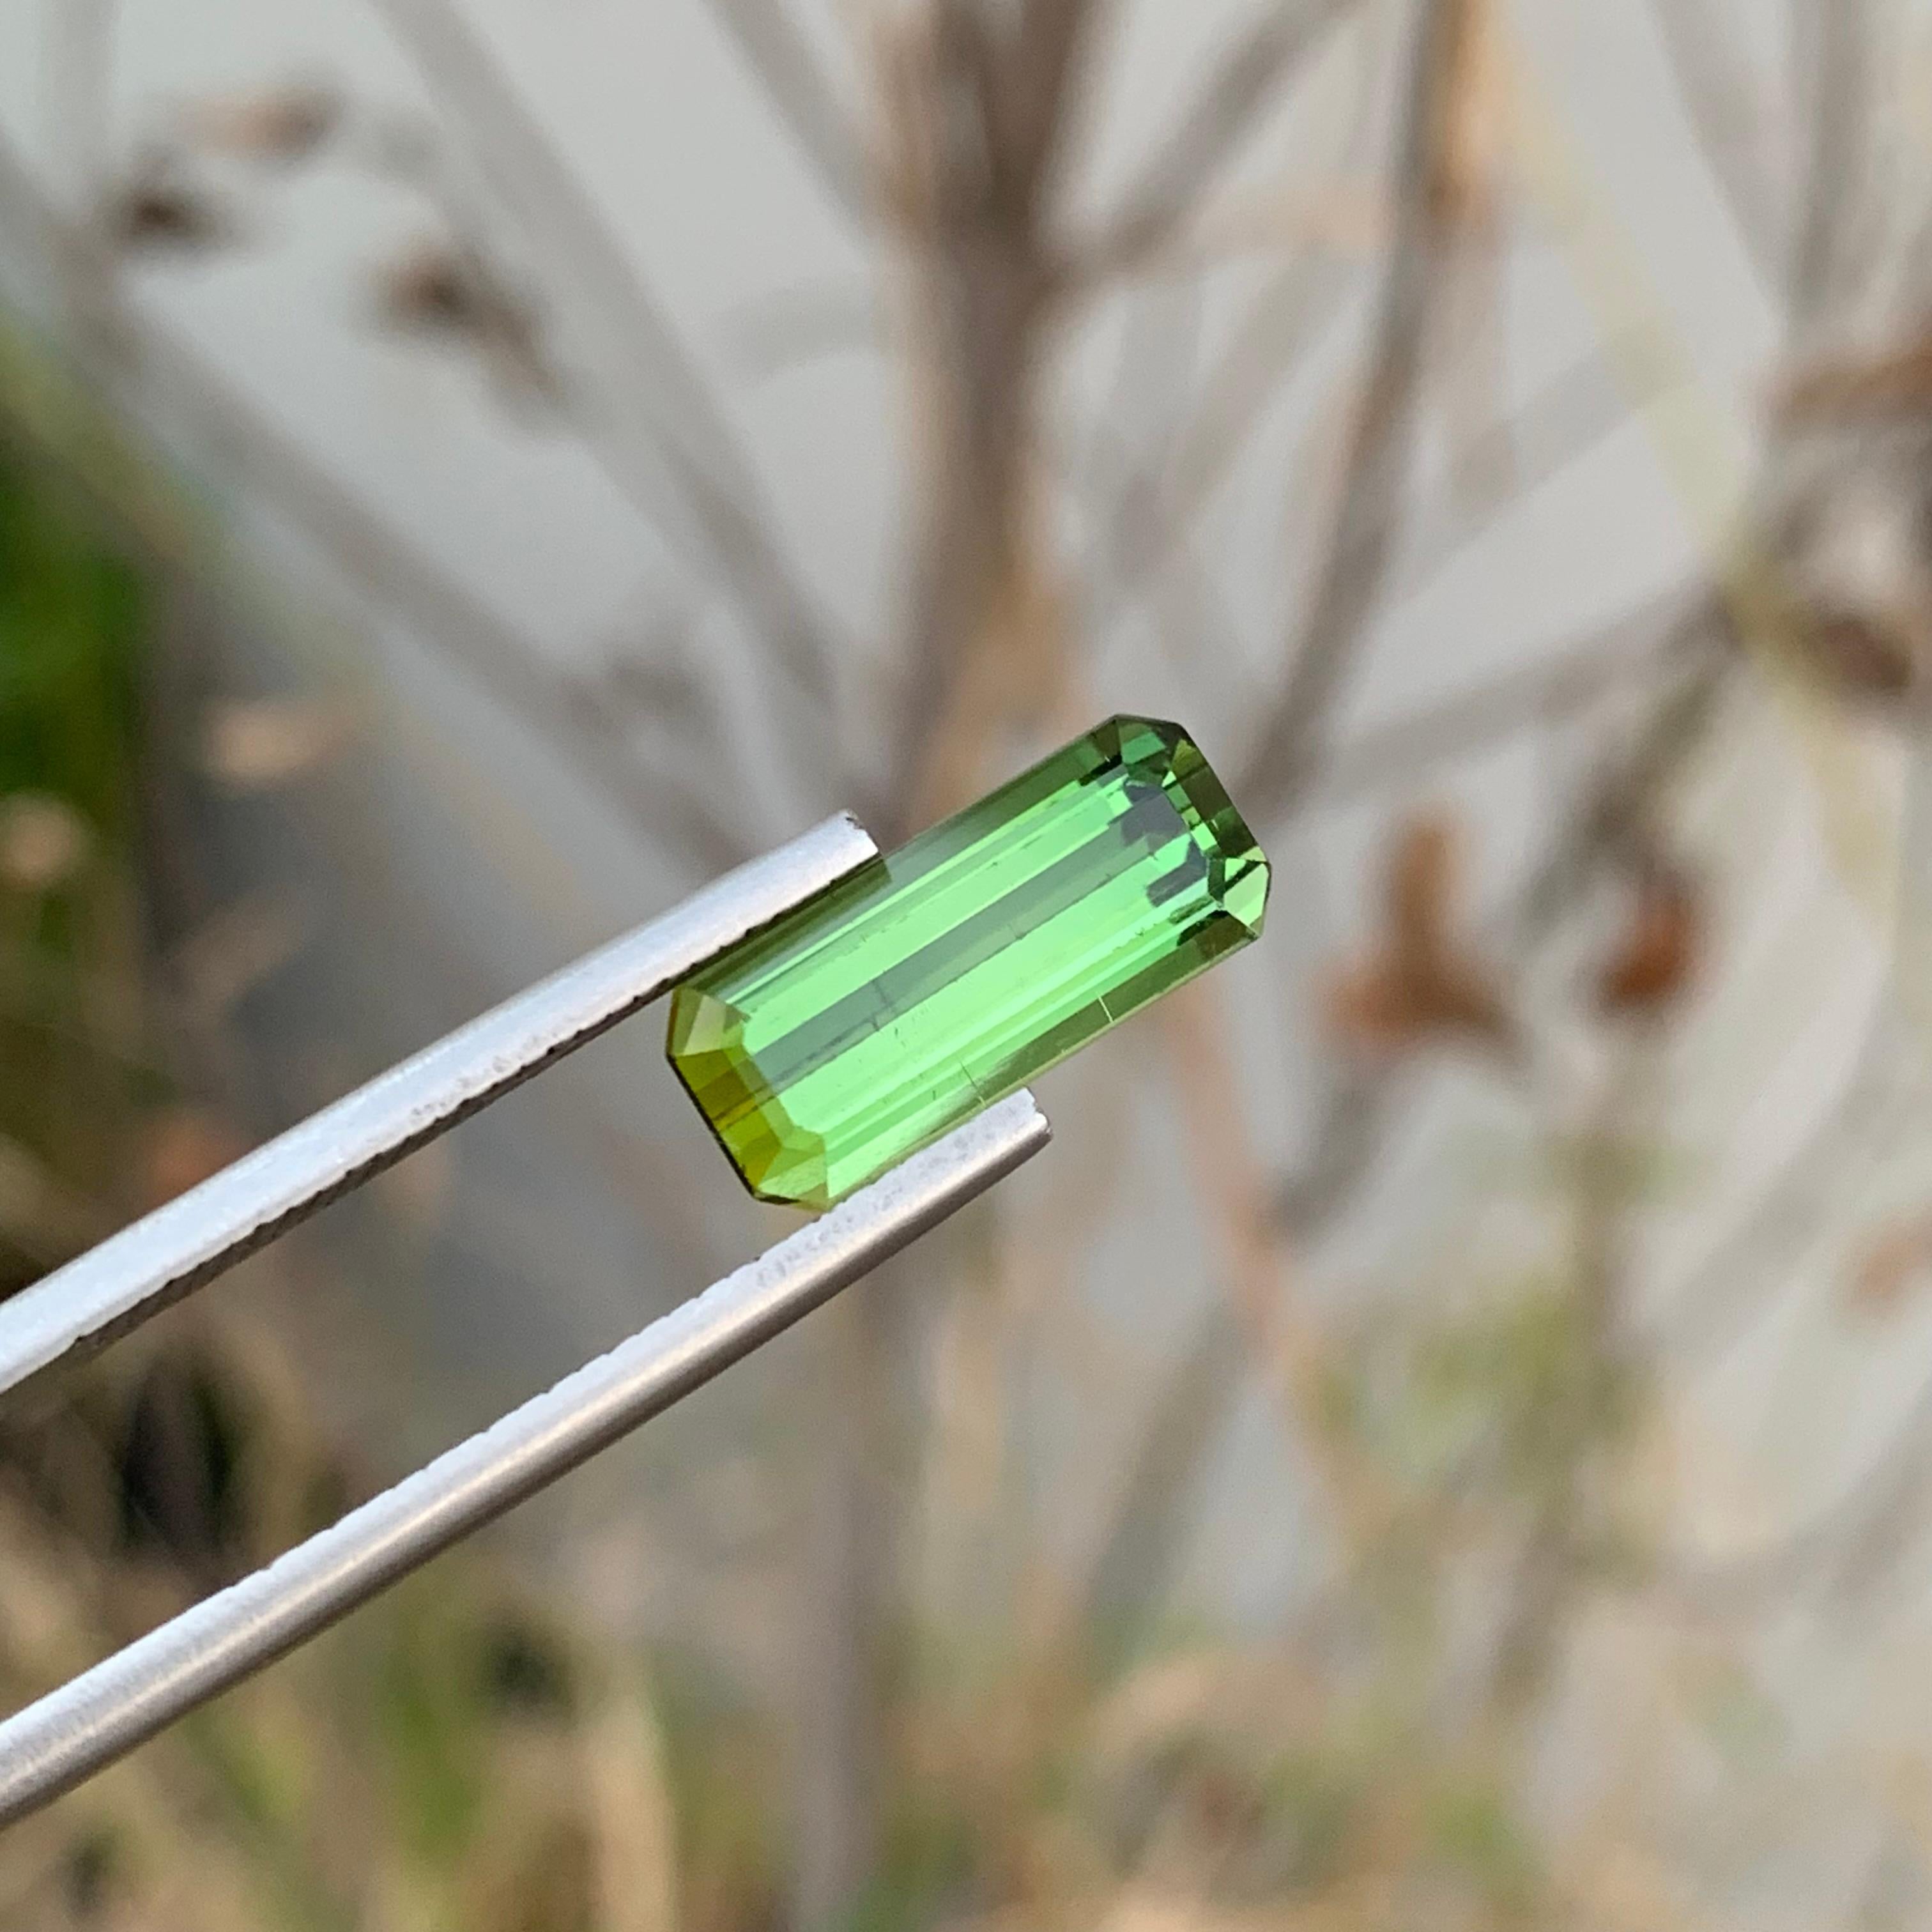 Loose Green Tourmaline
Weight: 4.15 Carats
Dimension: 14 x 6.1 x 5.2 Mm
Colour: Green
Origin: Afghanistan
Certificate: On Demand
Treatment: Non

Tourmaline is a captivating gemstone known for its remarkable variety of colors, making it a favorite